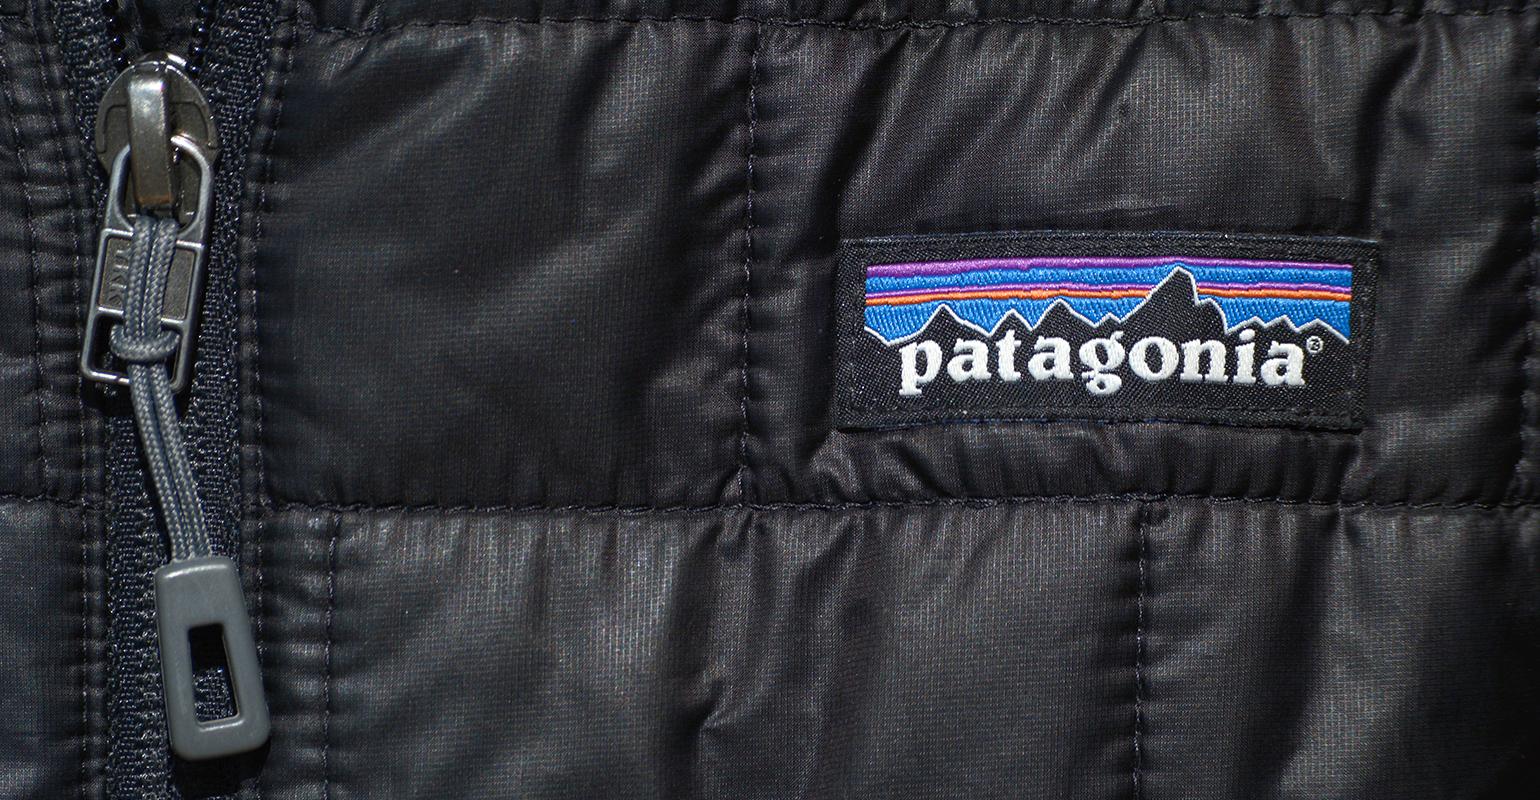 ruler Between monster Patagonia Billionaire Who Gave Up Company Skirts $700 Million Tax Hit |  Wealth Management